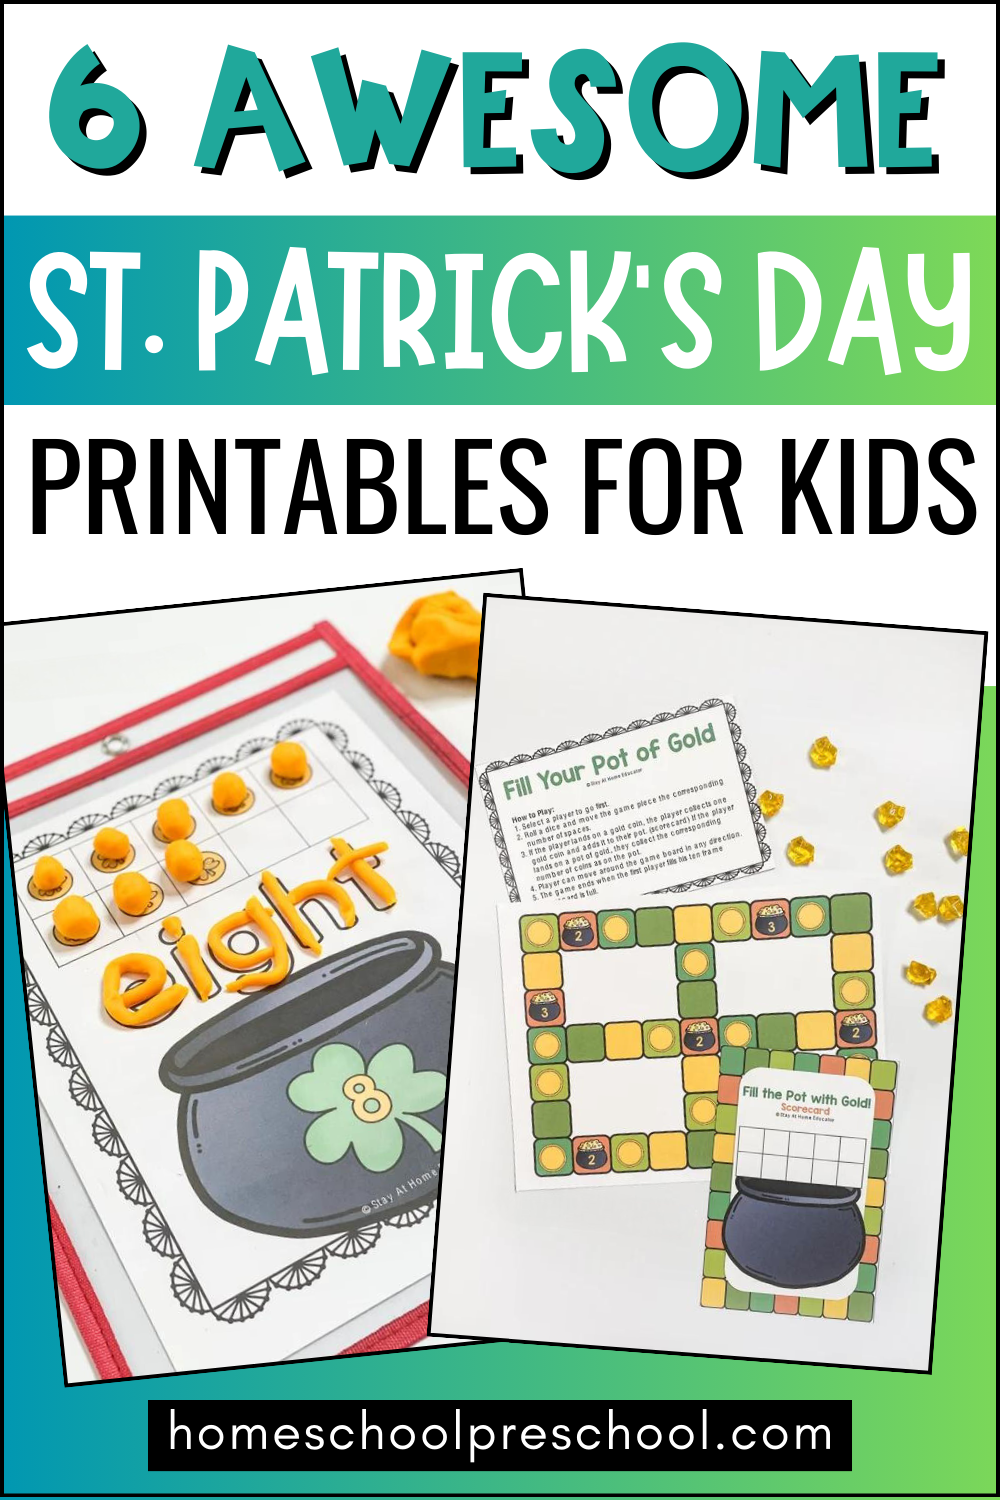 6 Awesome St. Patrick's Day Printables for Kids | counting mat number 8 with play dough balls and the number word eight rolled in playdough | fill your pot of gold game board and score card with gold coins | printable St. Patrick's day activities for preschool and kindergarten |